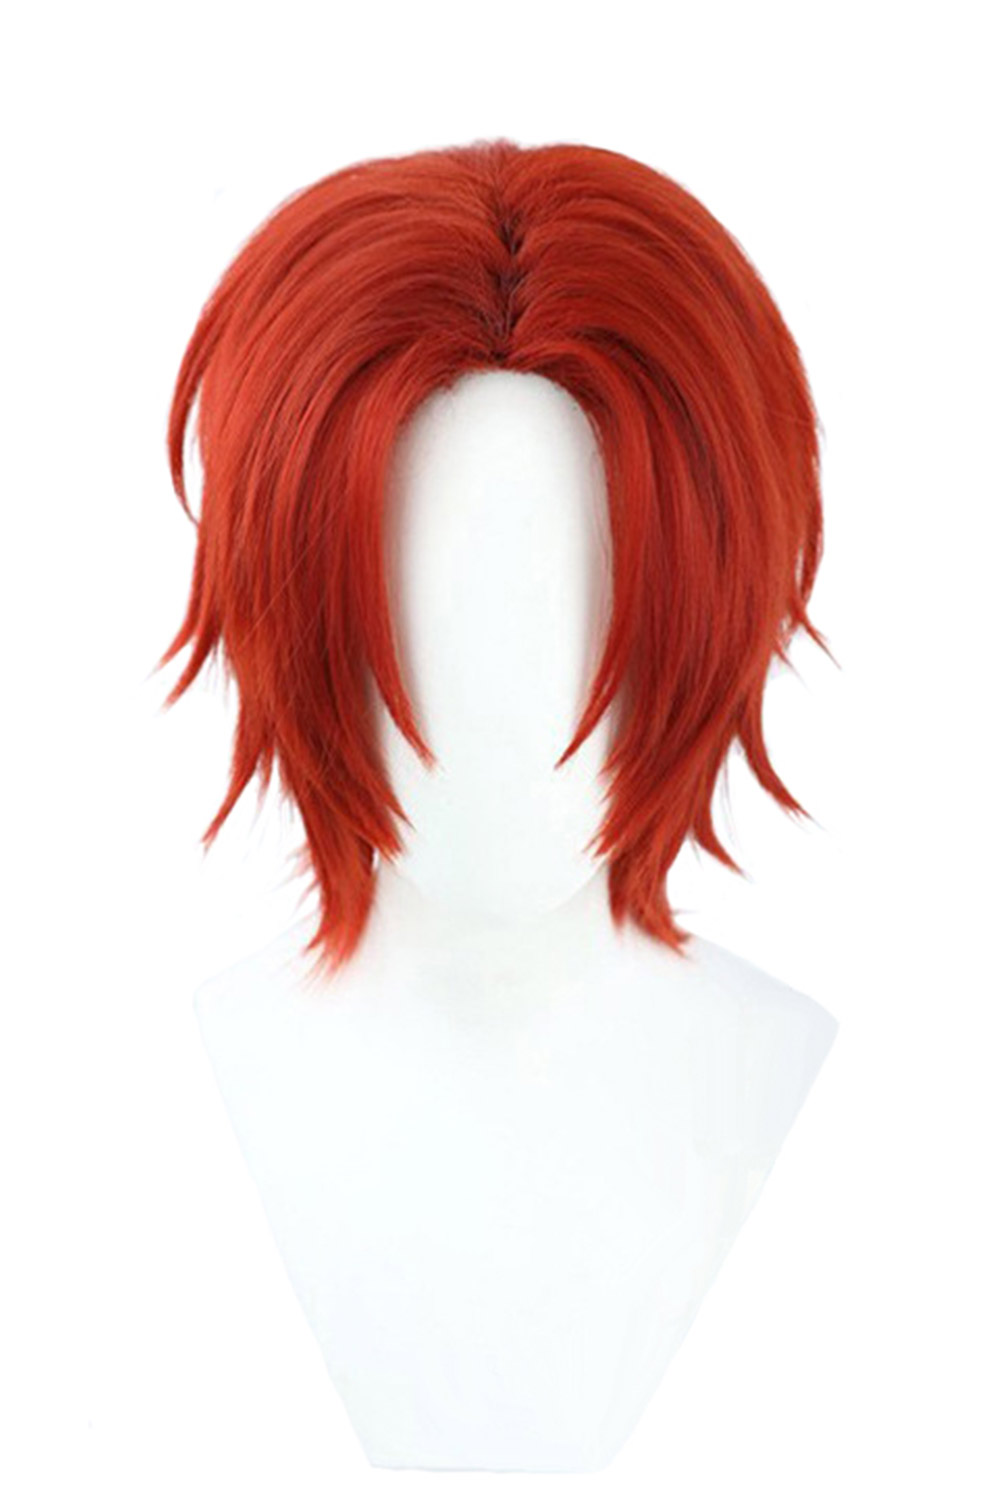 Anime One Piece Shanks Cosplay Red Wig Heat Resistant Synthetic Hair Halloween Costume Accessories